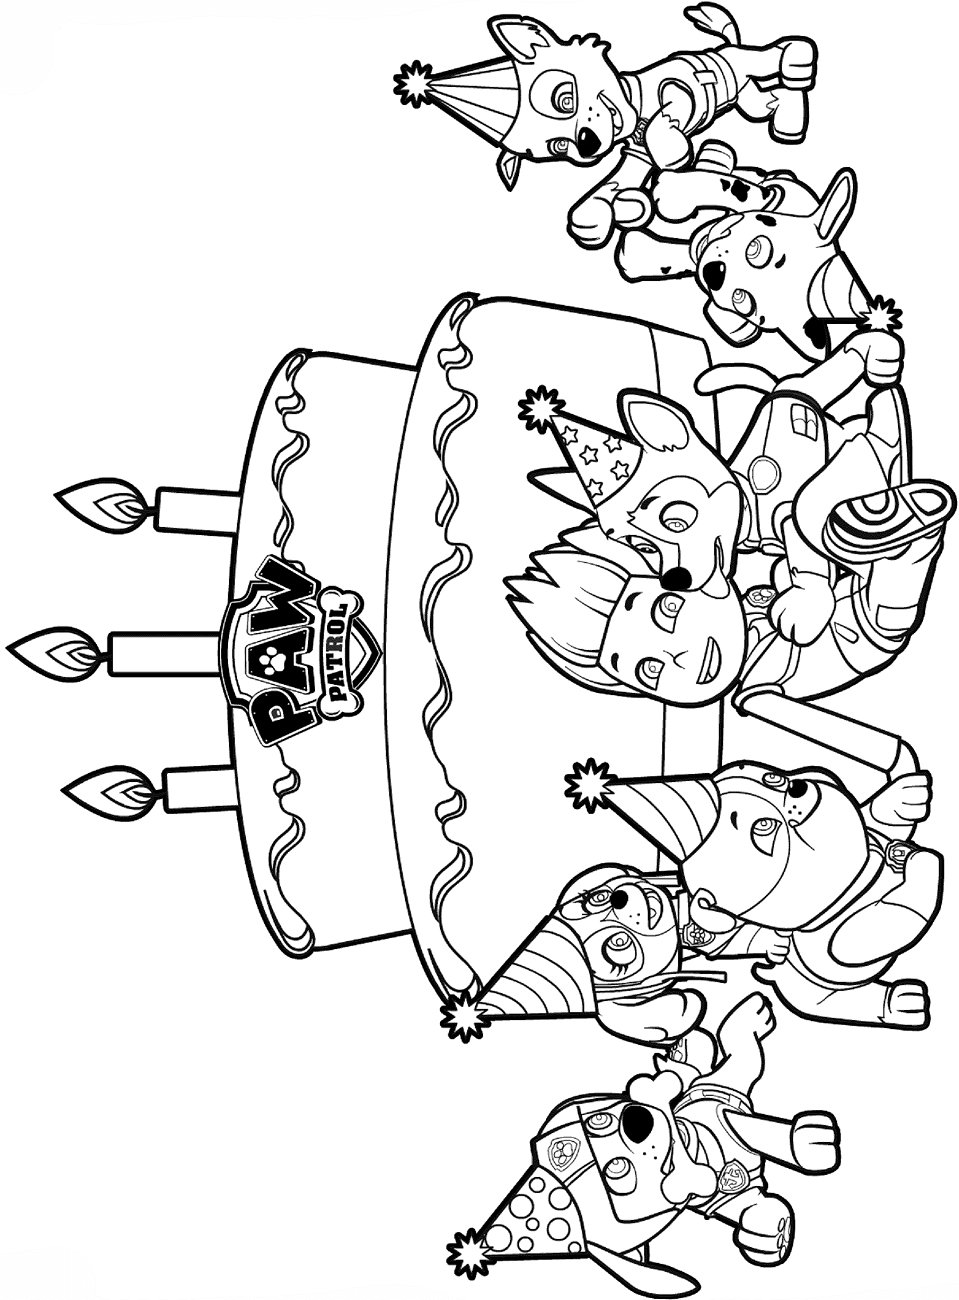 837 Animal Ryder Coloring Pages with Printable